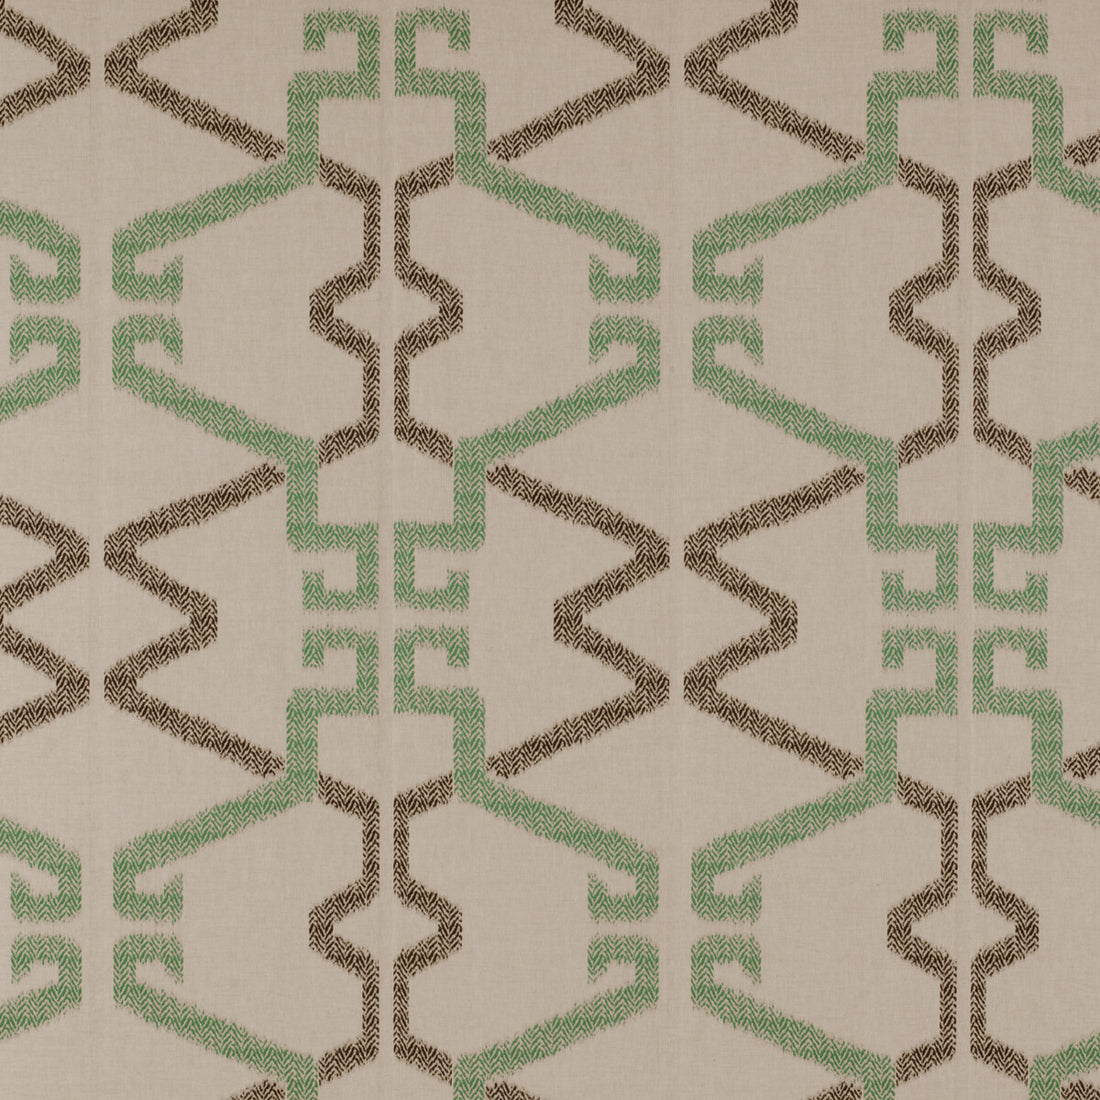 Caprera fabric in onyx/verde color - pattern GDT5314.002.0 - by Gaston y Daniela in the Tierras collection